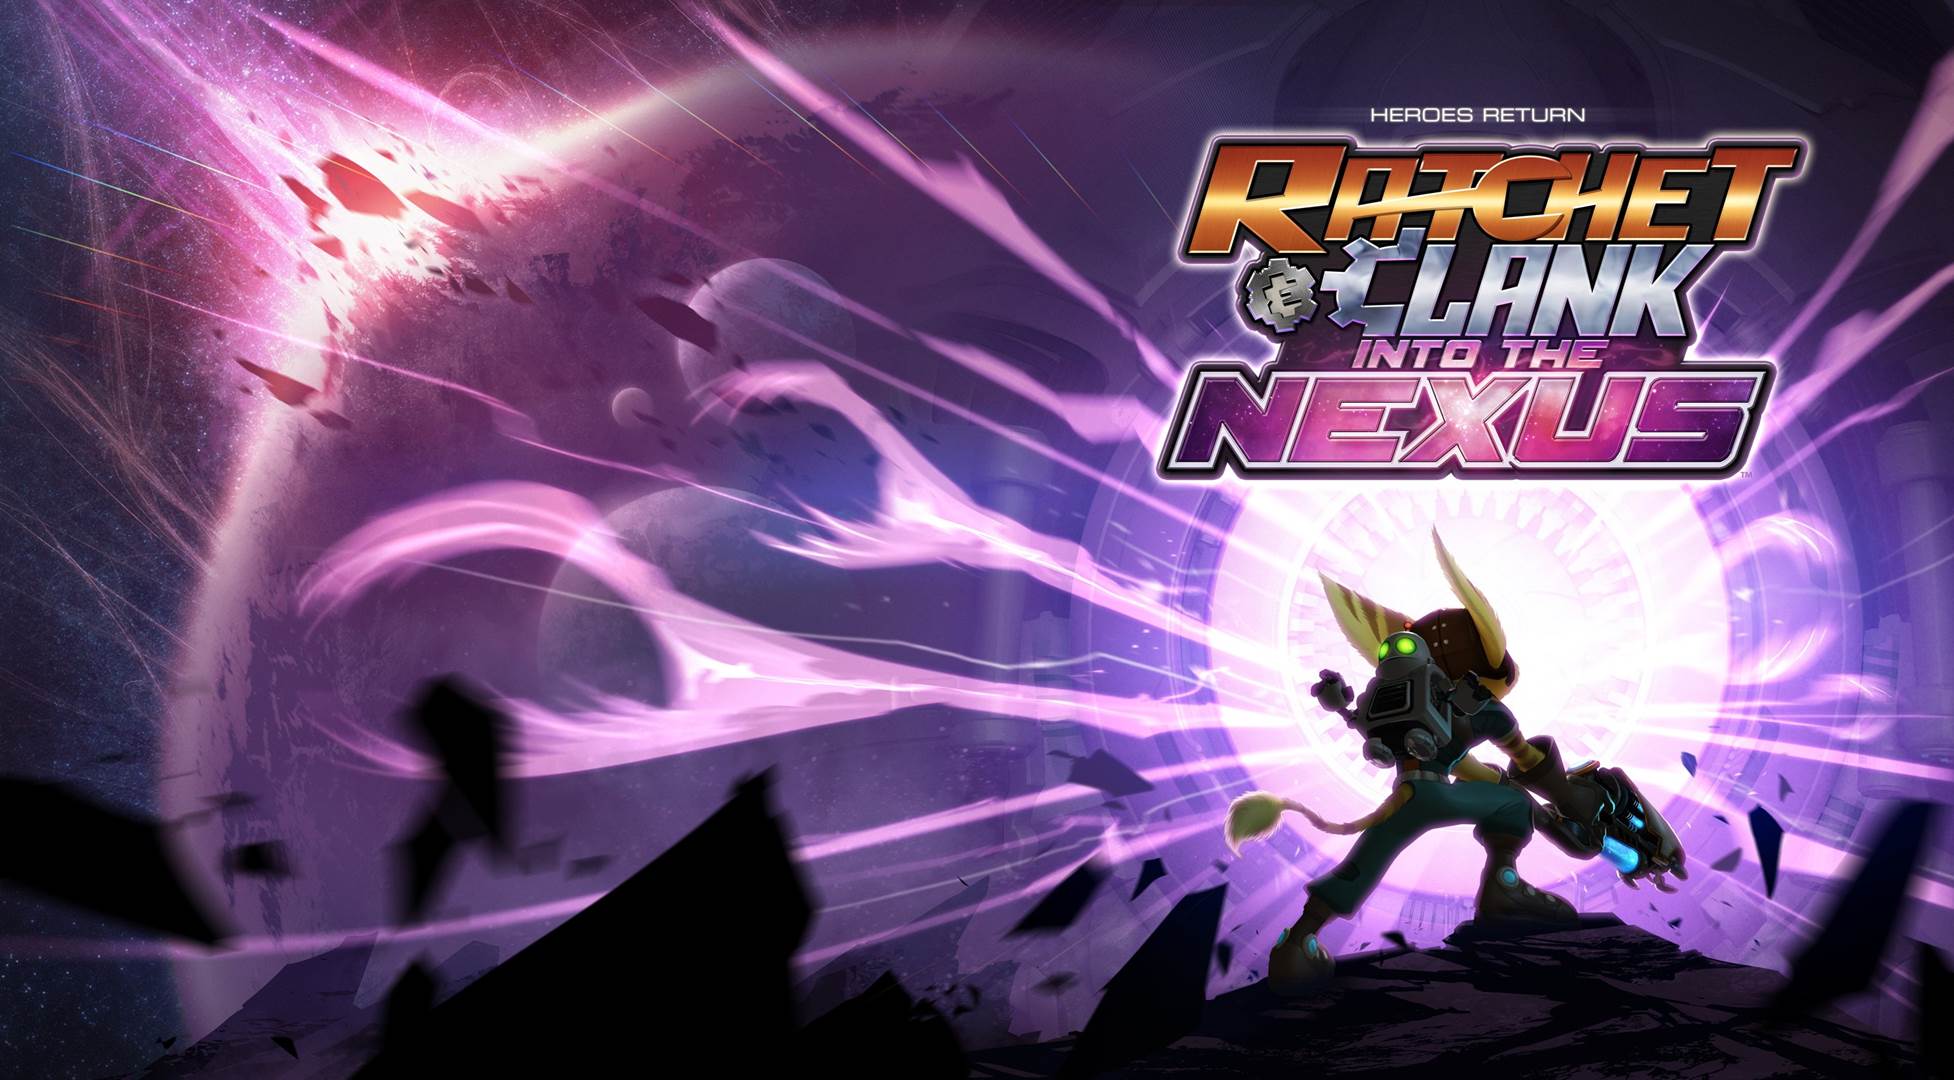 Ratchet And Clank Into The Nexus Wallpapers in 1080P HD GamingBolt